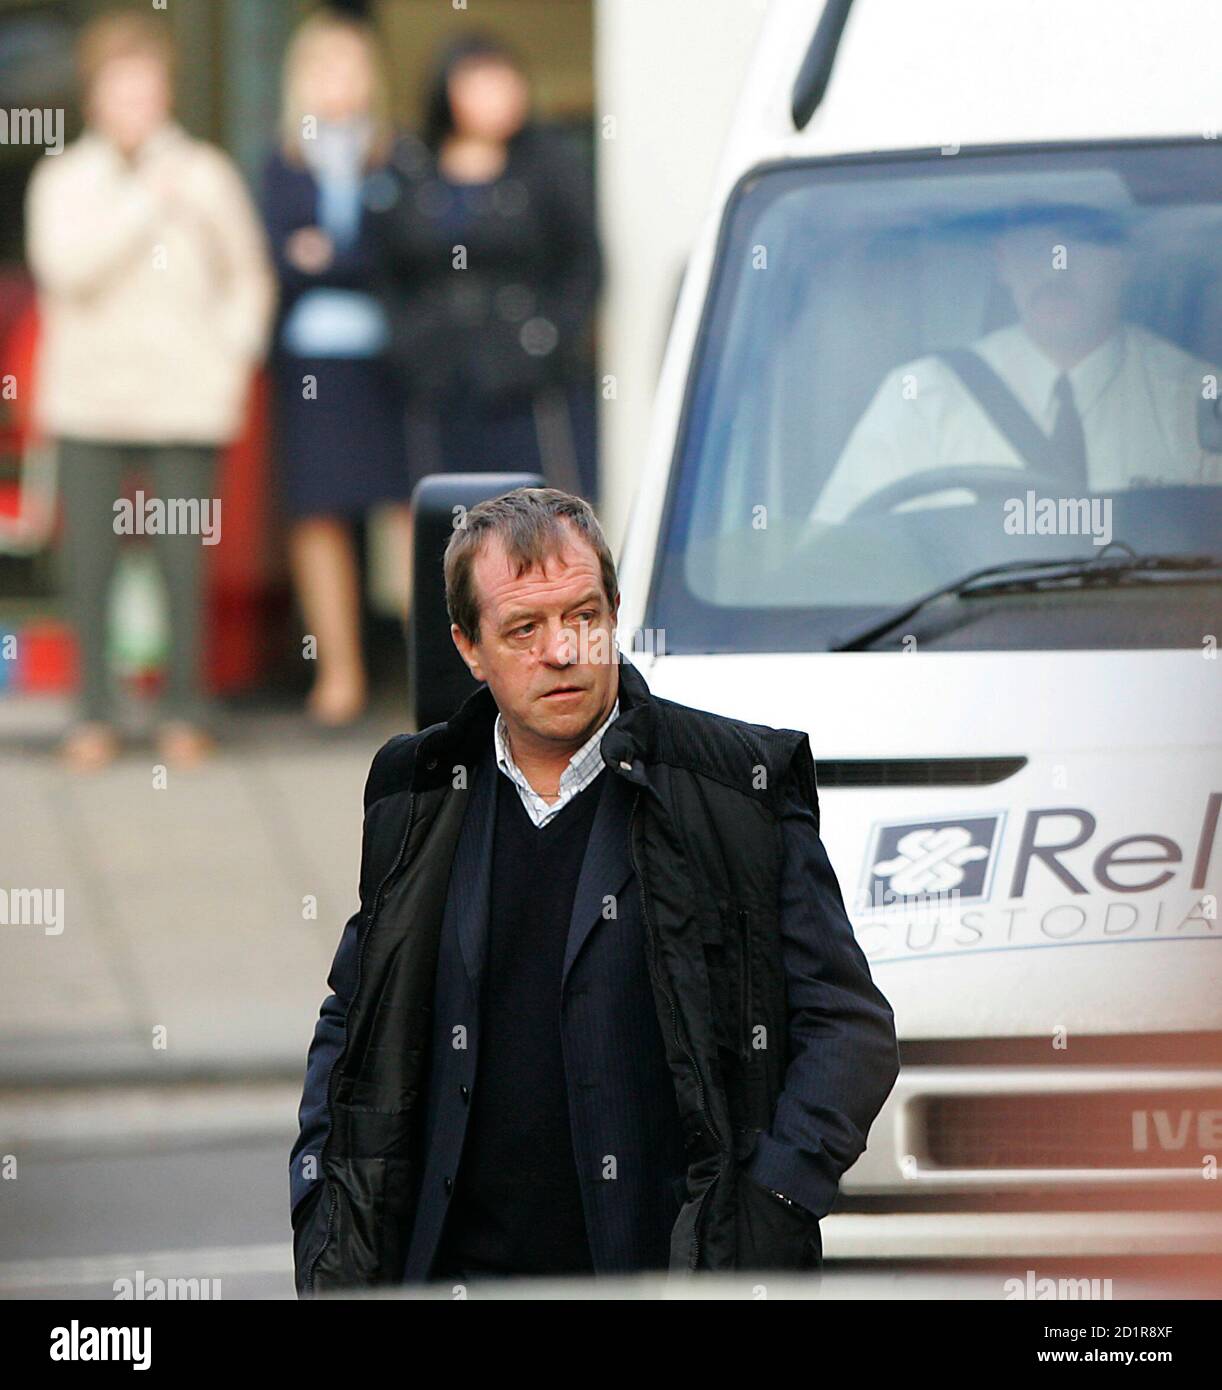 Michael Hamilton, the father of missing girl Vicky Hamilton, walks in front of the prison van carrying Peter Tobin, who is accused of killing Vicky, as it arrives at Linlithgow Sherriff Court, central Scotland November 15, 2007.  Tobin appeared in court on Thursday charged with murdering the teenage girl whose remains were found in a house in Kent, 16 years after she vanished from her home.      REUTERS/David Moir (BRITAIN) Stock Photo